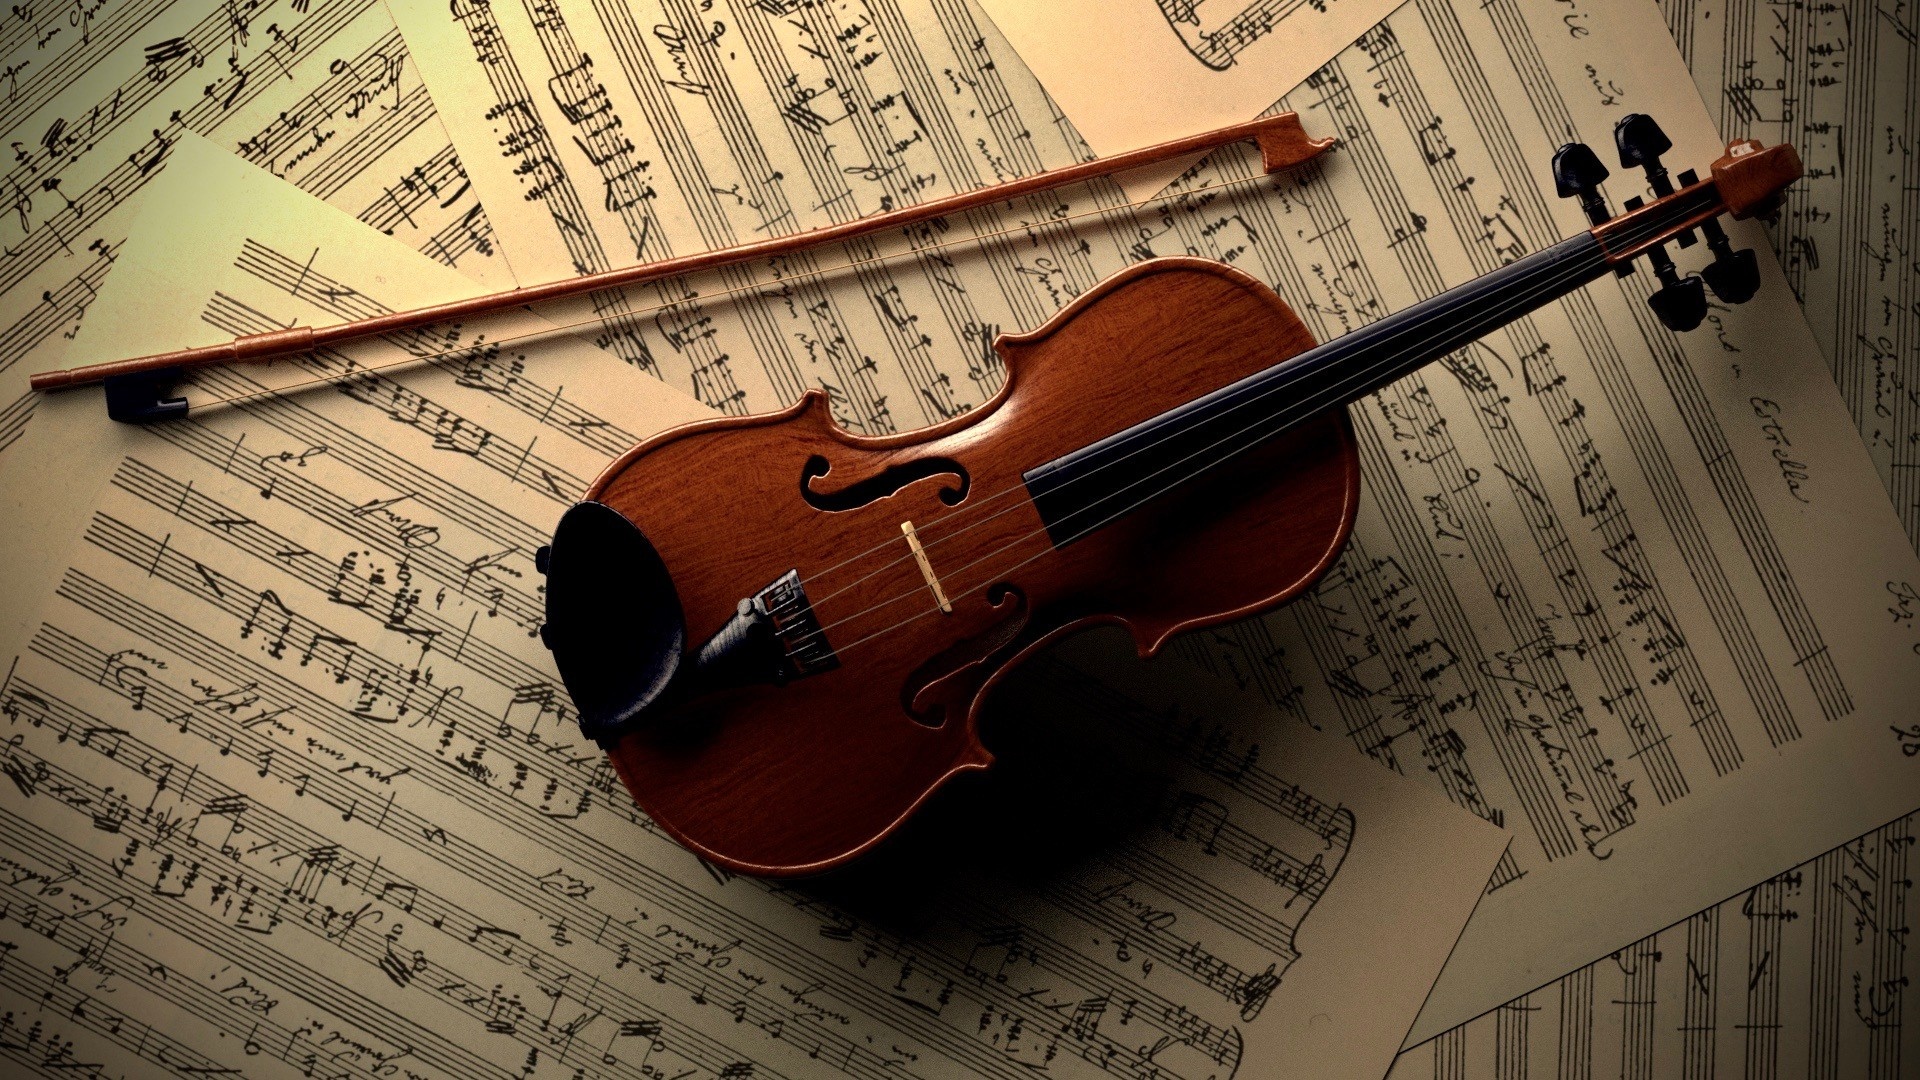 Viola: 3D Art-Realism, Lacquered Wood Texture, A Modern Take On The Presentation Of A Classic, Musical Score. 1920x1080 Full HD Wallpaper.